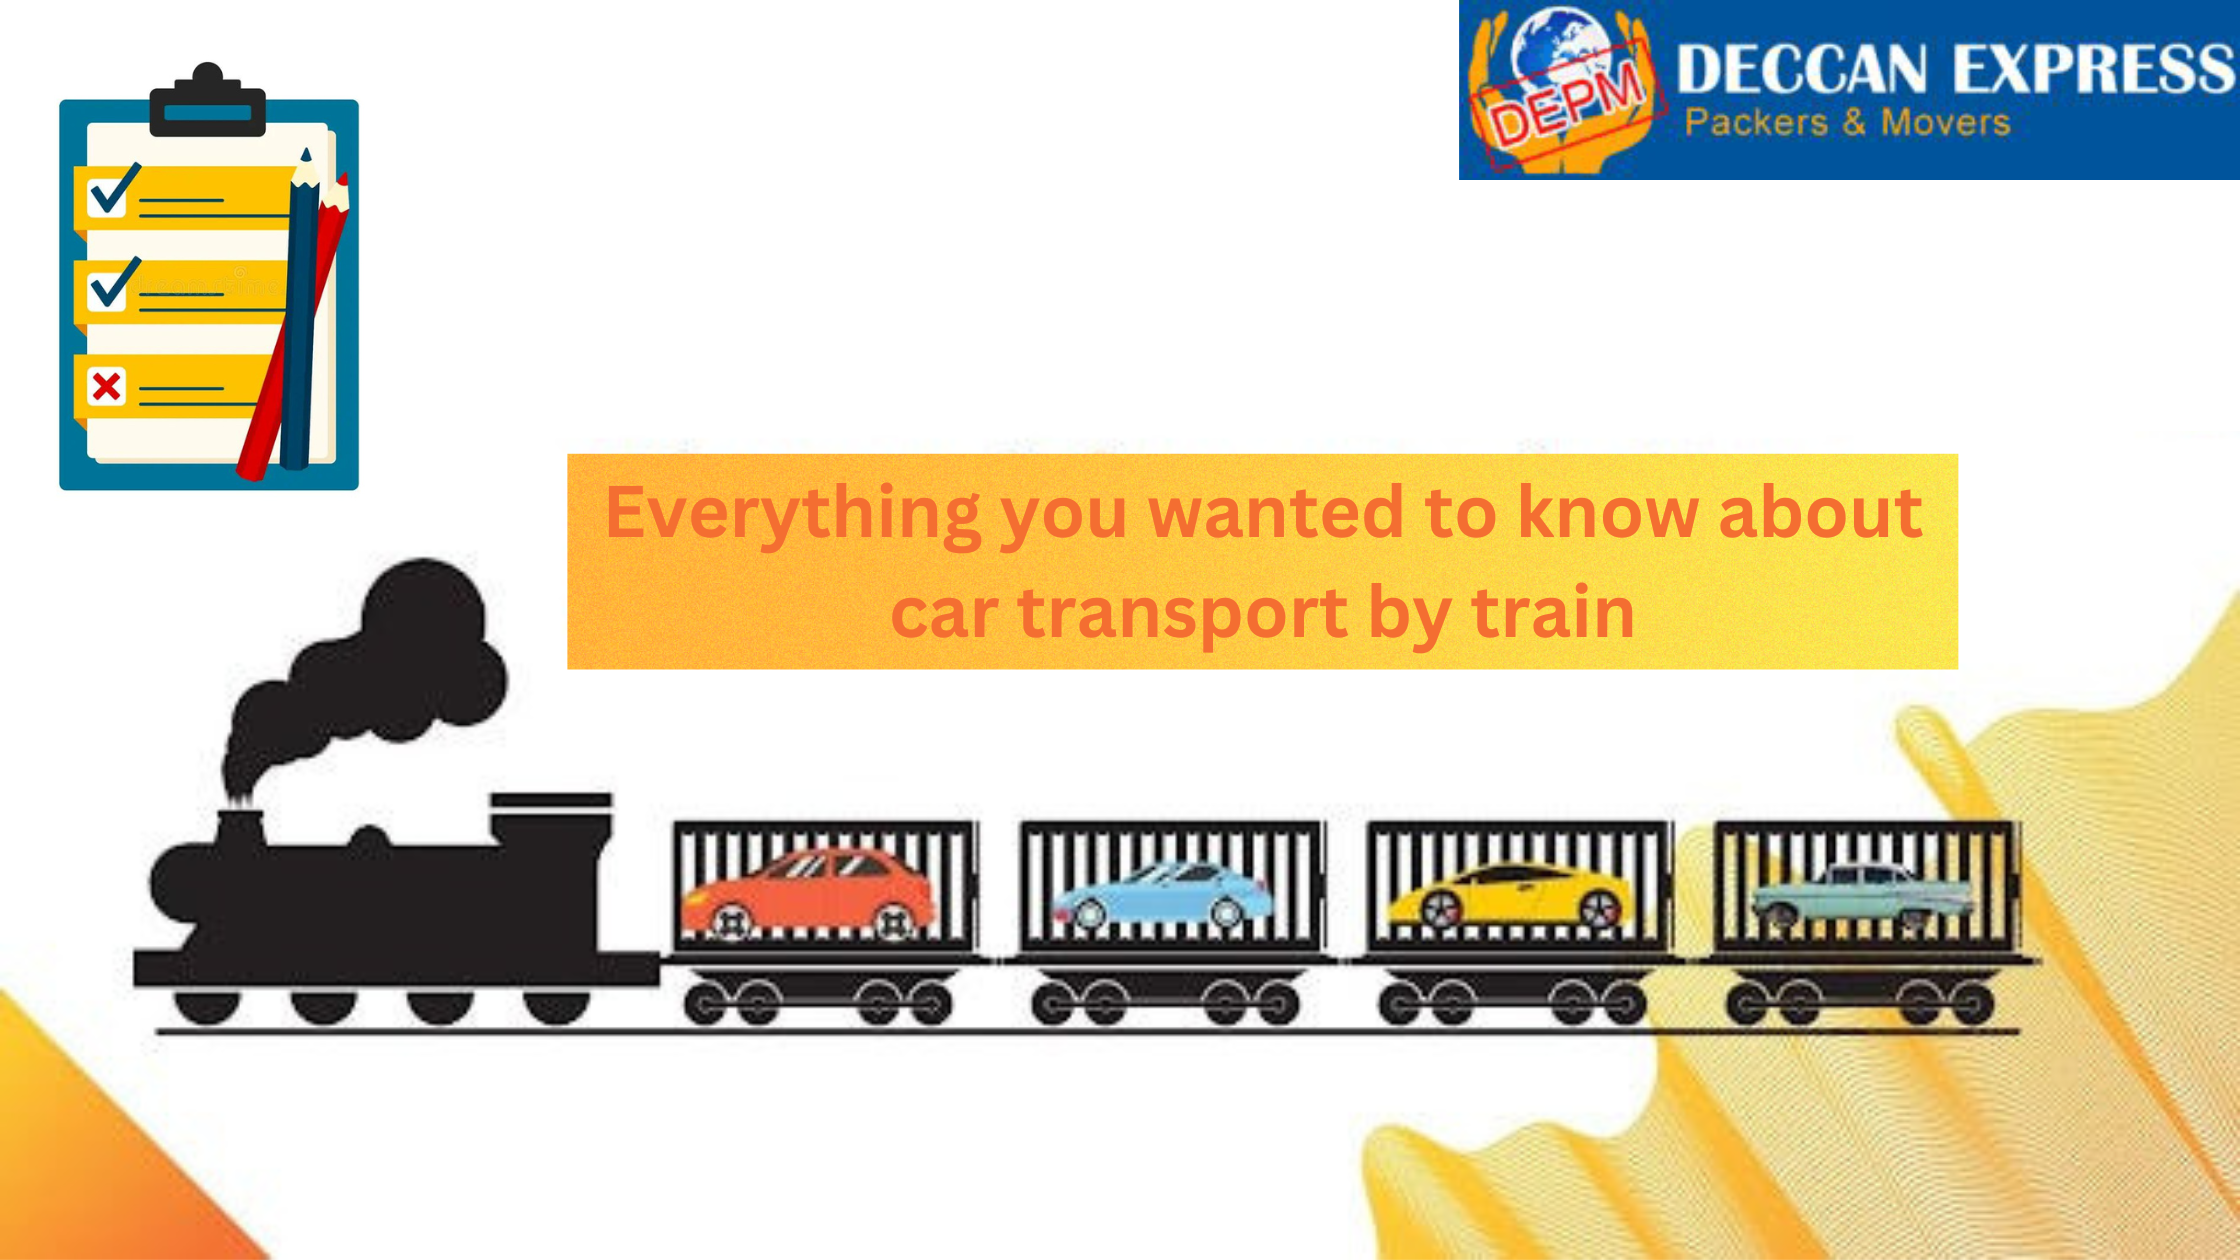 Everything you wanted to know about car transport by train